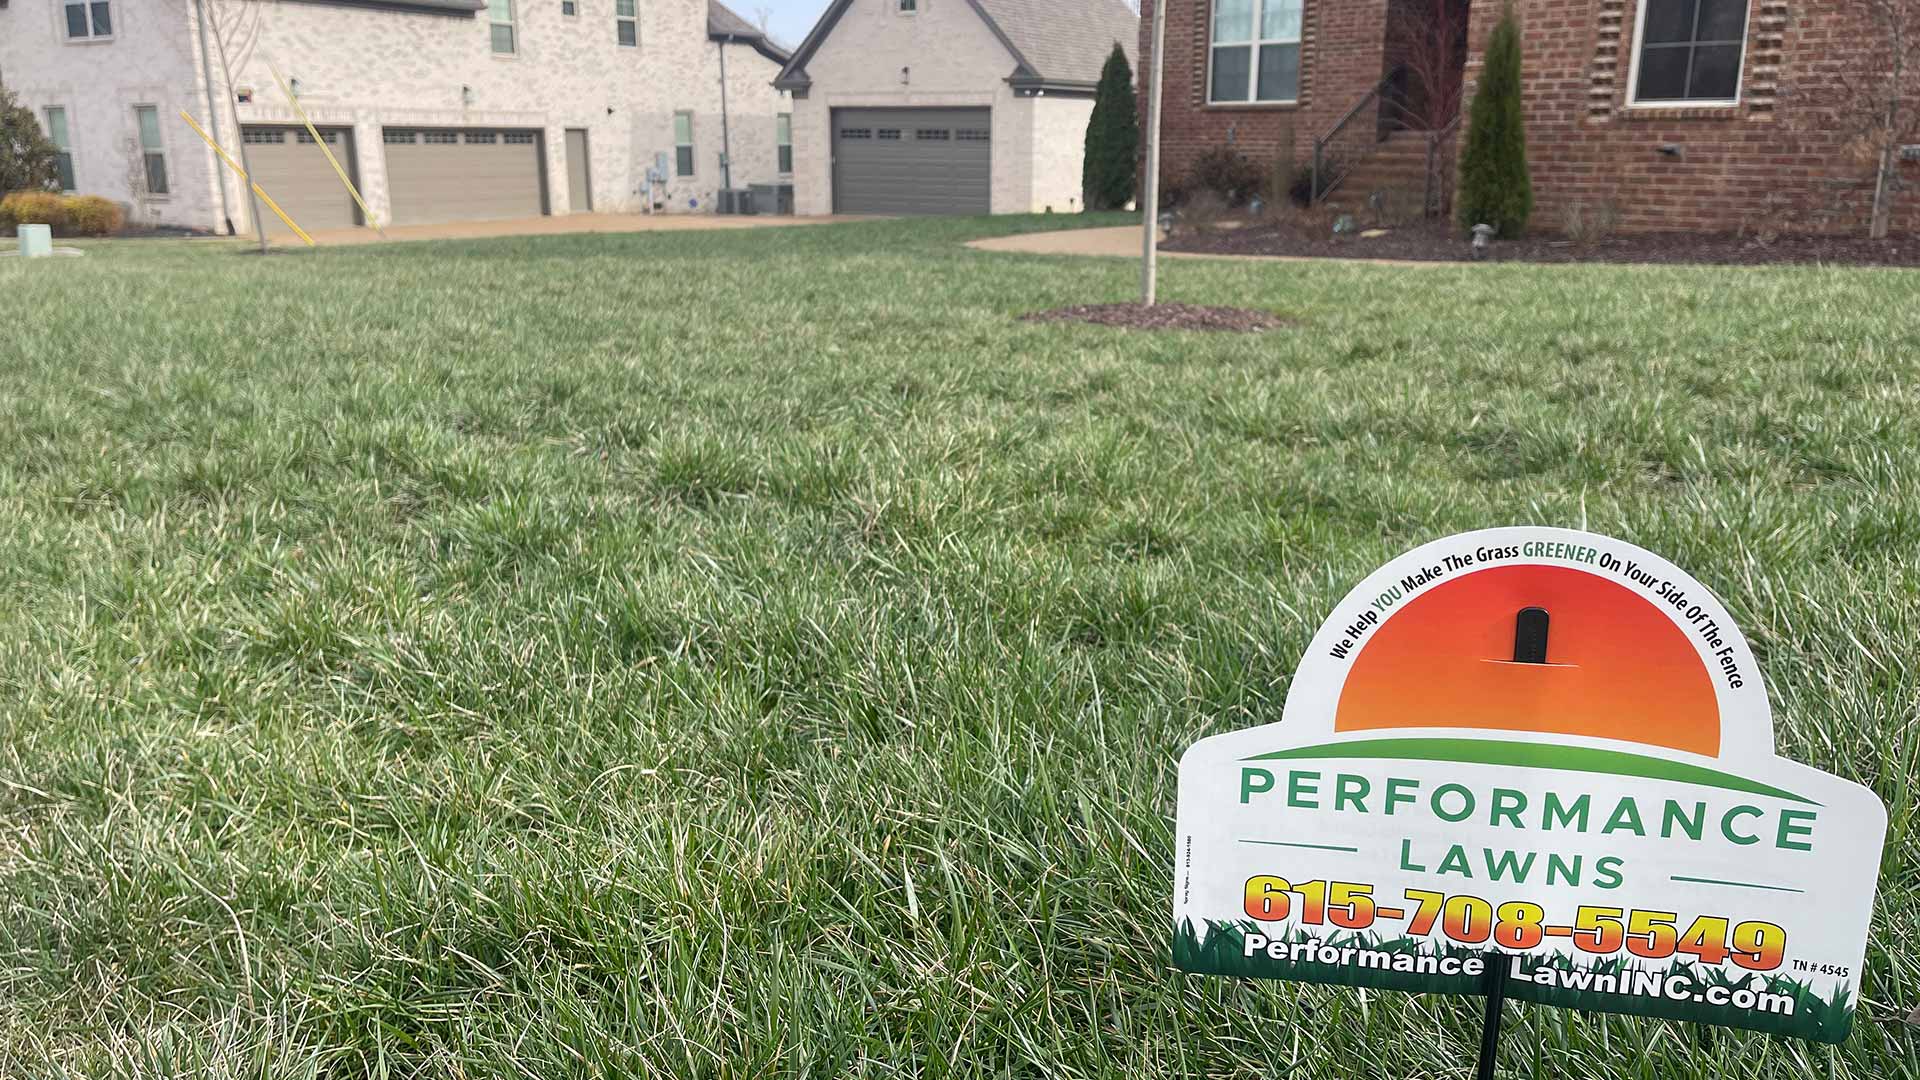 Branded signage displayed on a serviced lawn in Gallatin, TN.